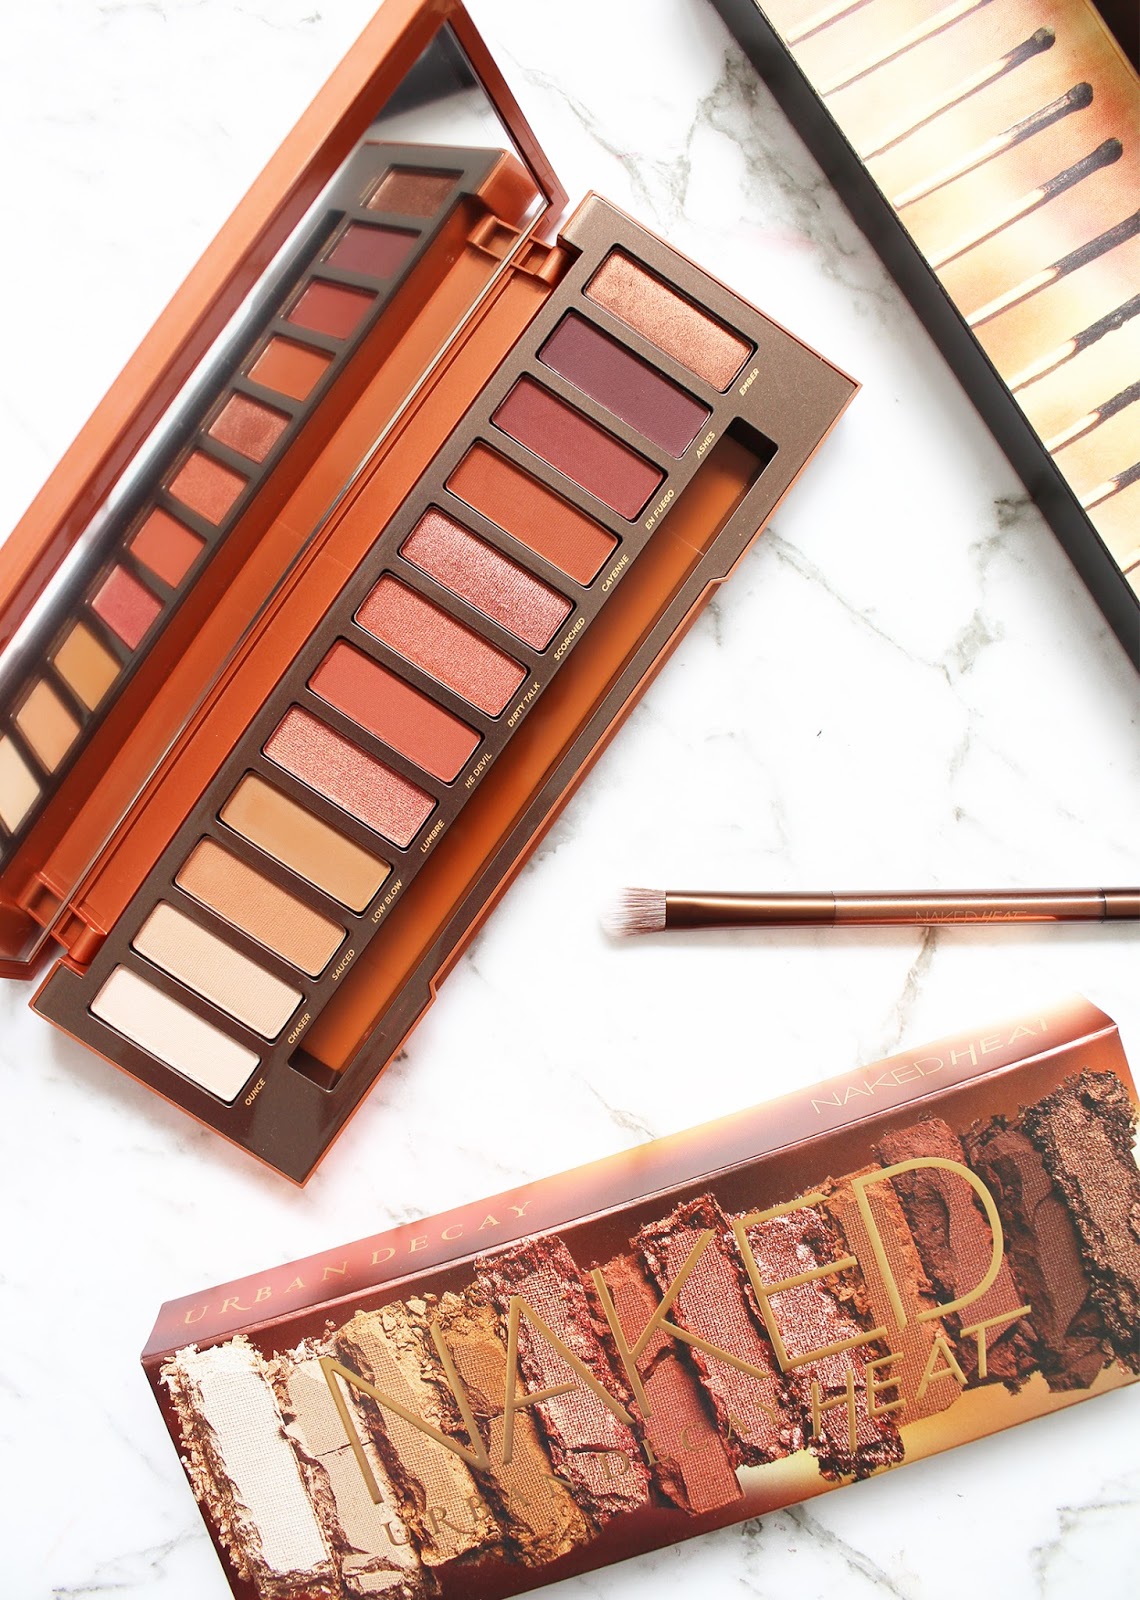 URBAN DECAY | Naked Heat Palette - Review + Swatches - CassandraMyee